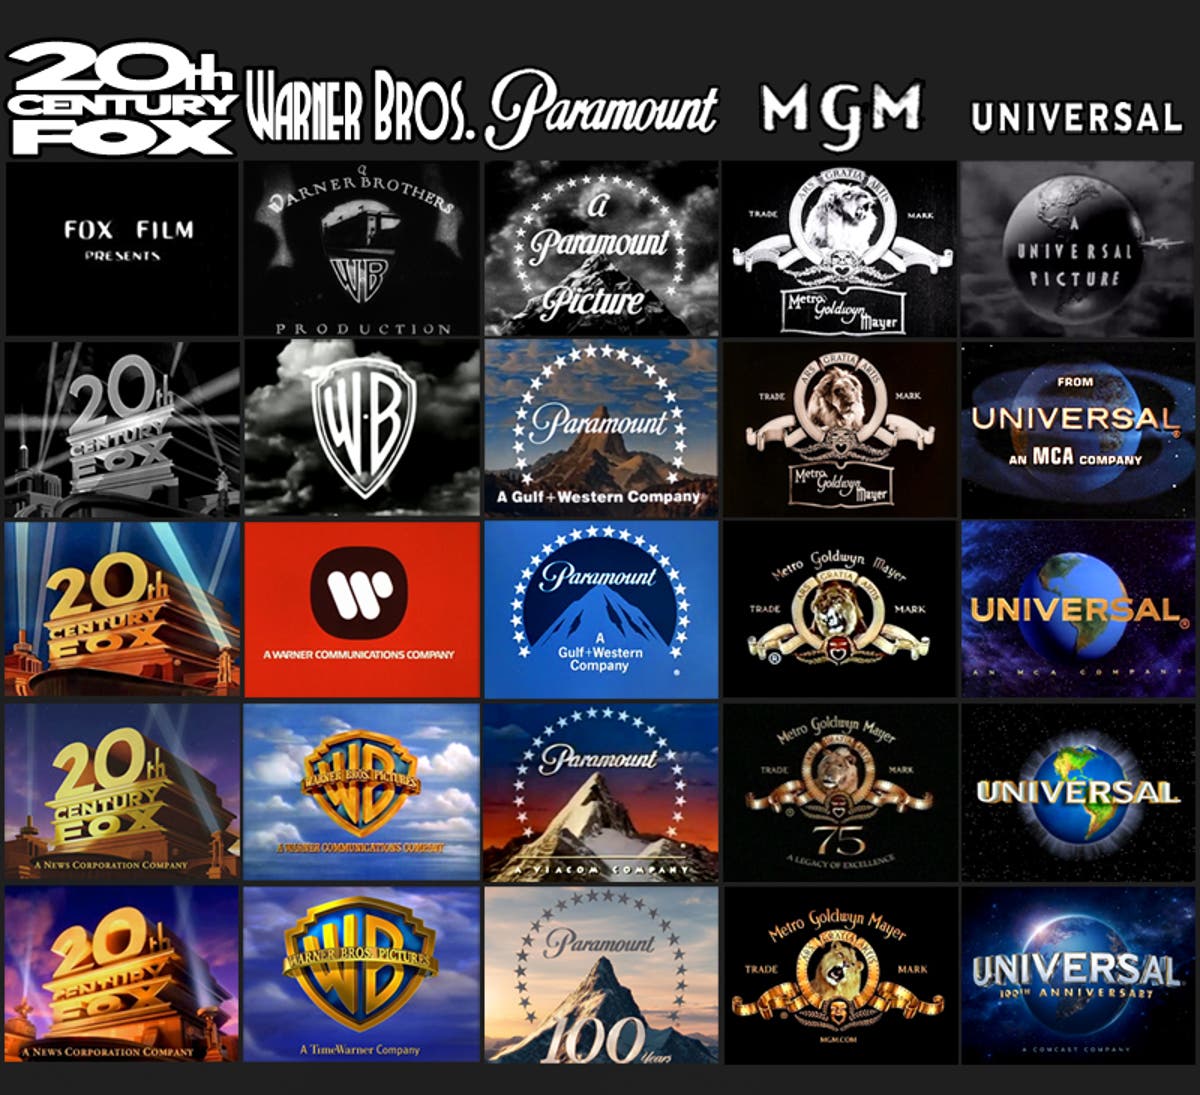 The Best Movies That Change the Studio Logo in the Credits